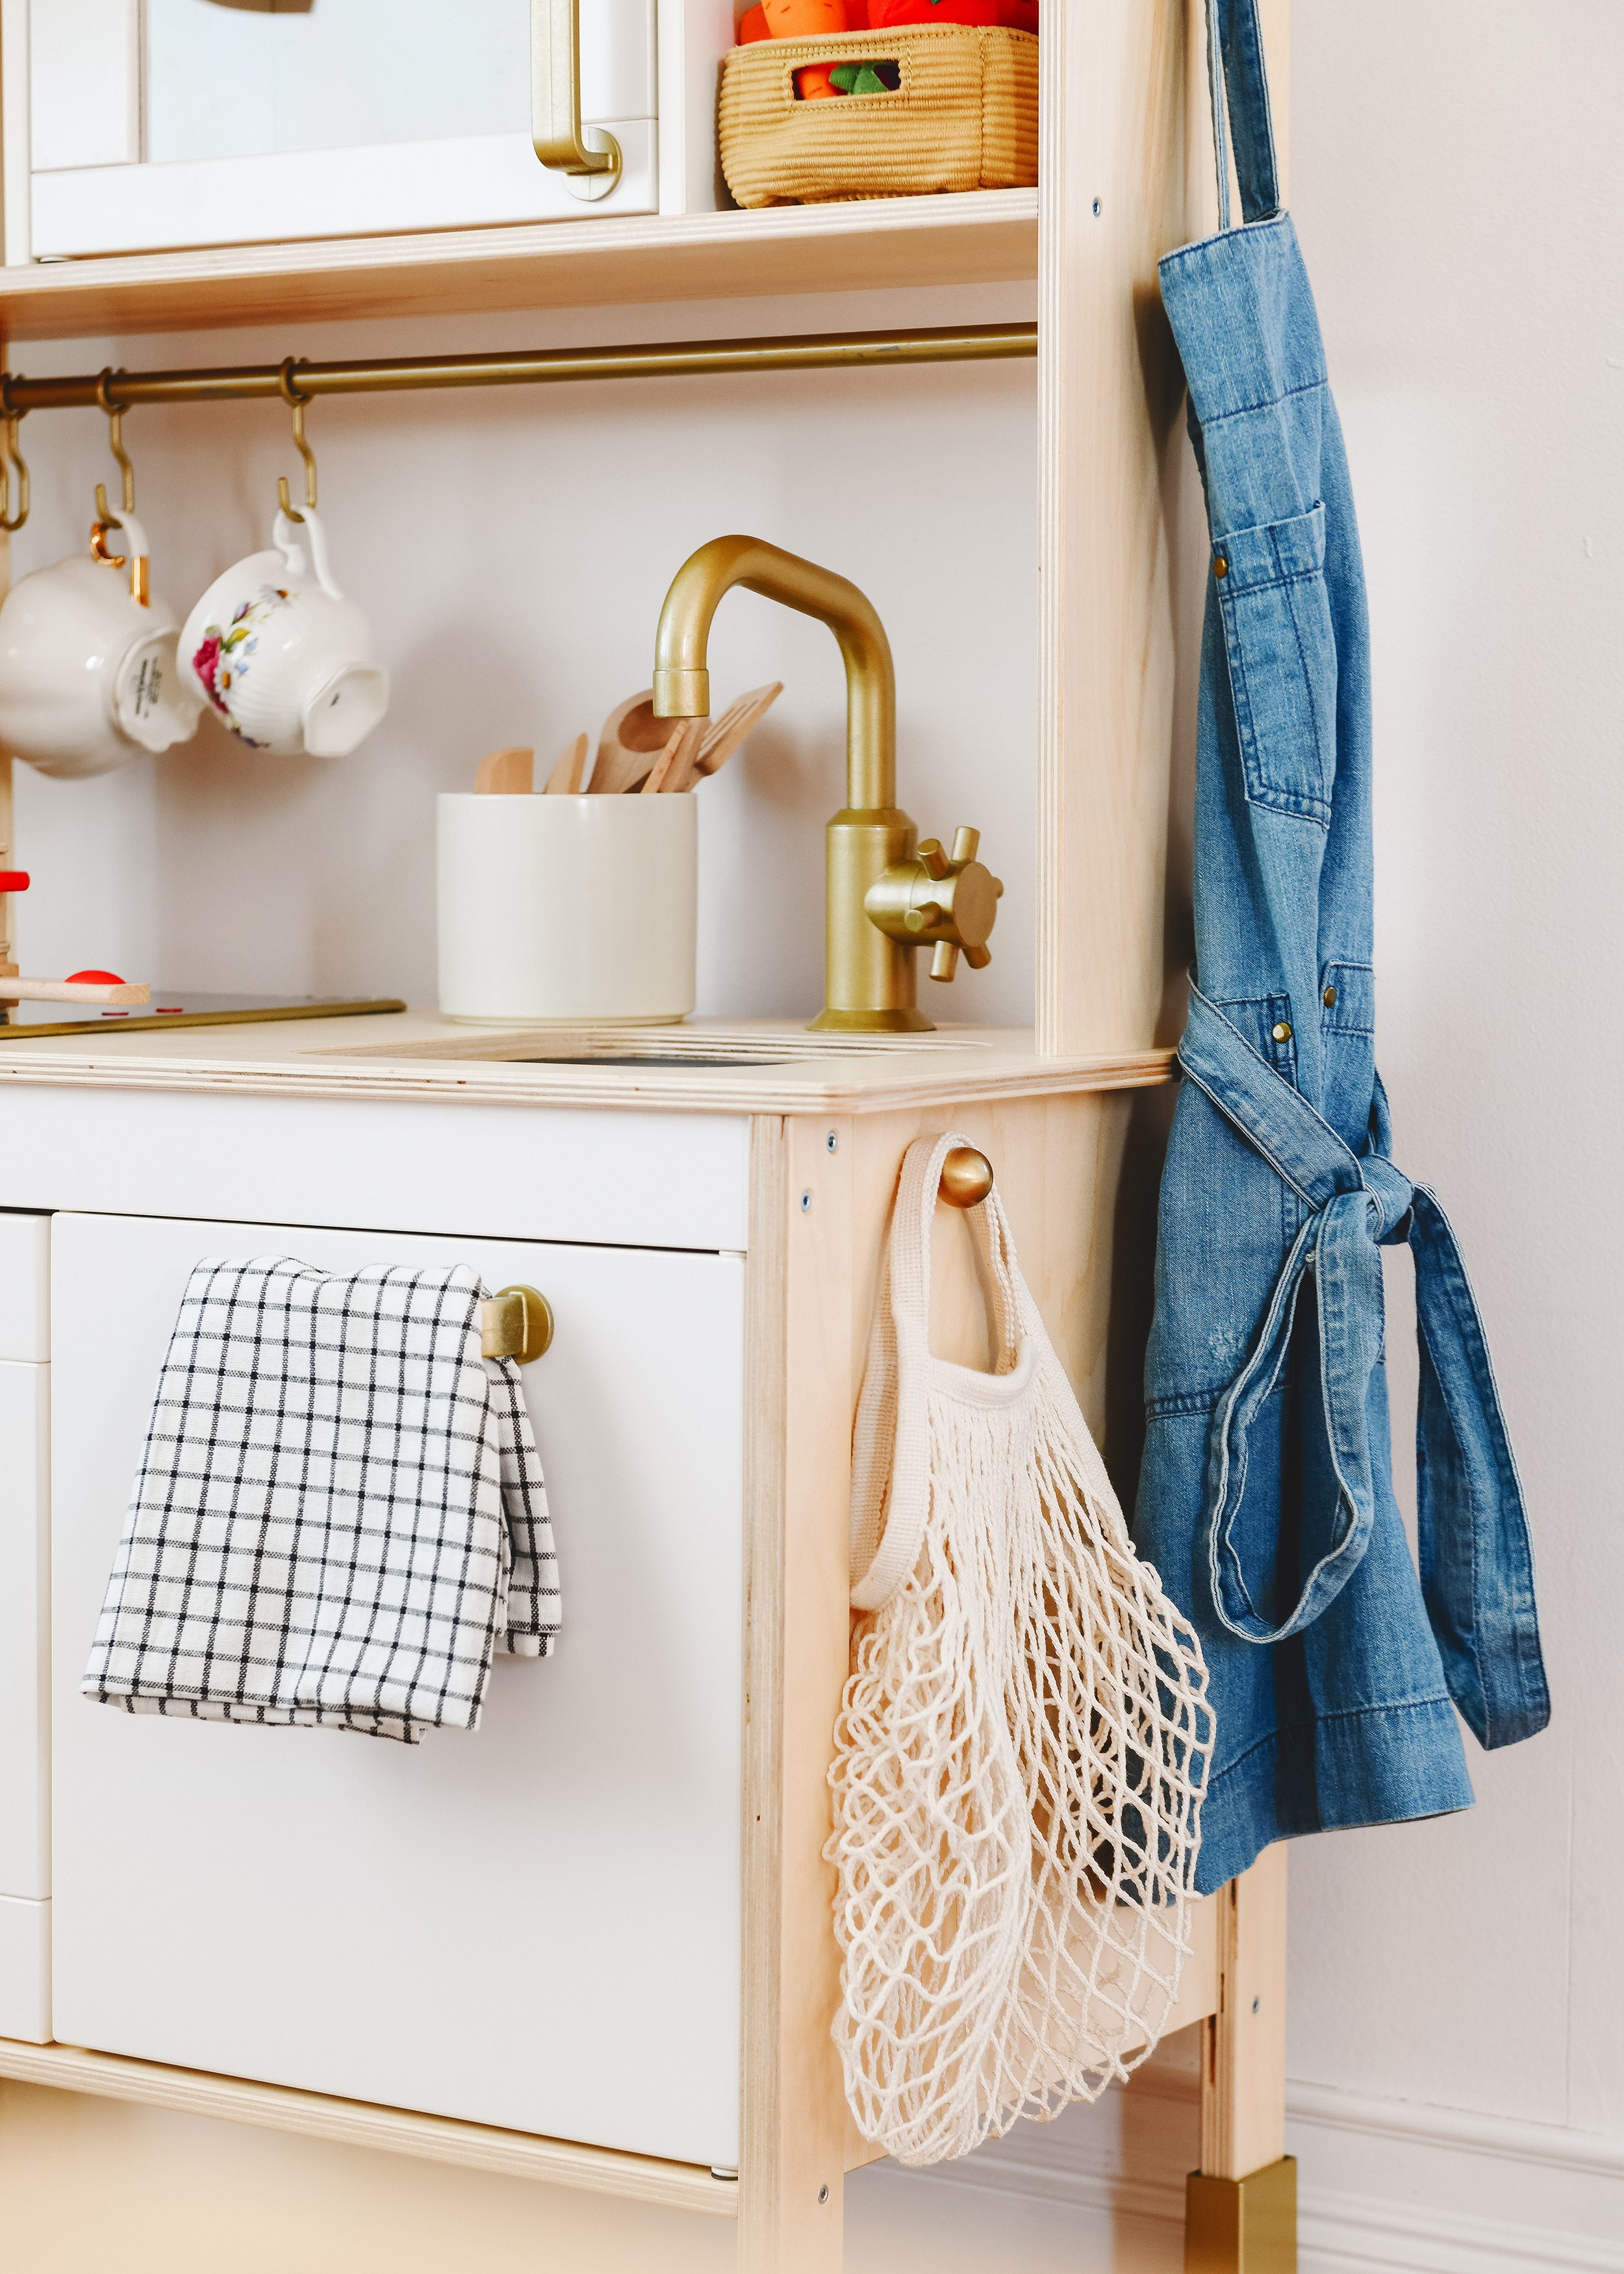 Tips for Stocking Your Play Kitchen + 36 of the Cutest Accessories! | A corner of Lucy's playroom showing a close up of her IKEA DUKTIG play kitchen and hanging brass knobs for her apron and mesh bag | via Yellow Brick Home